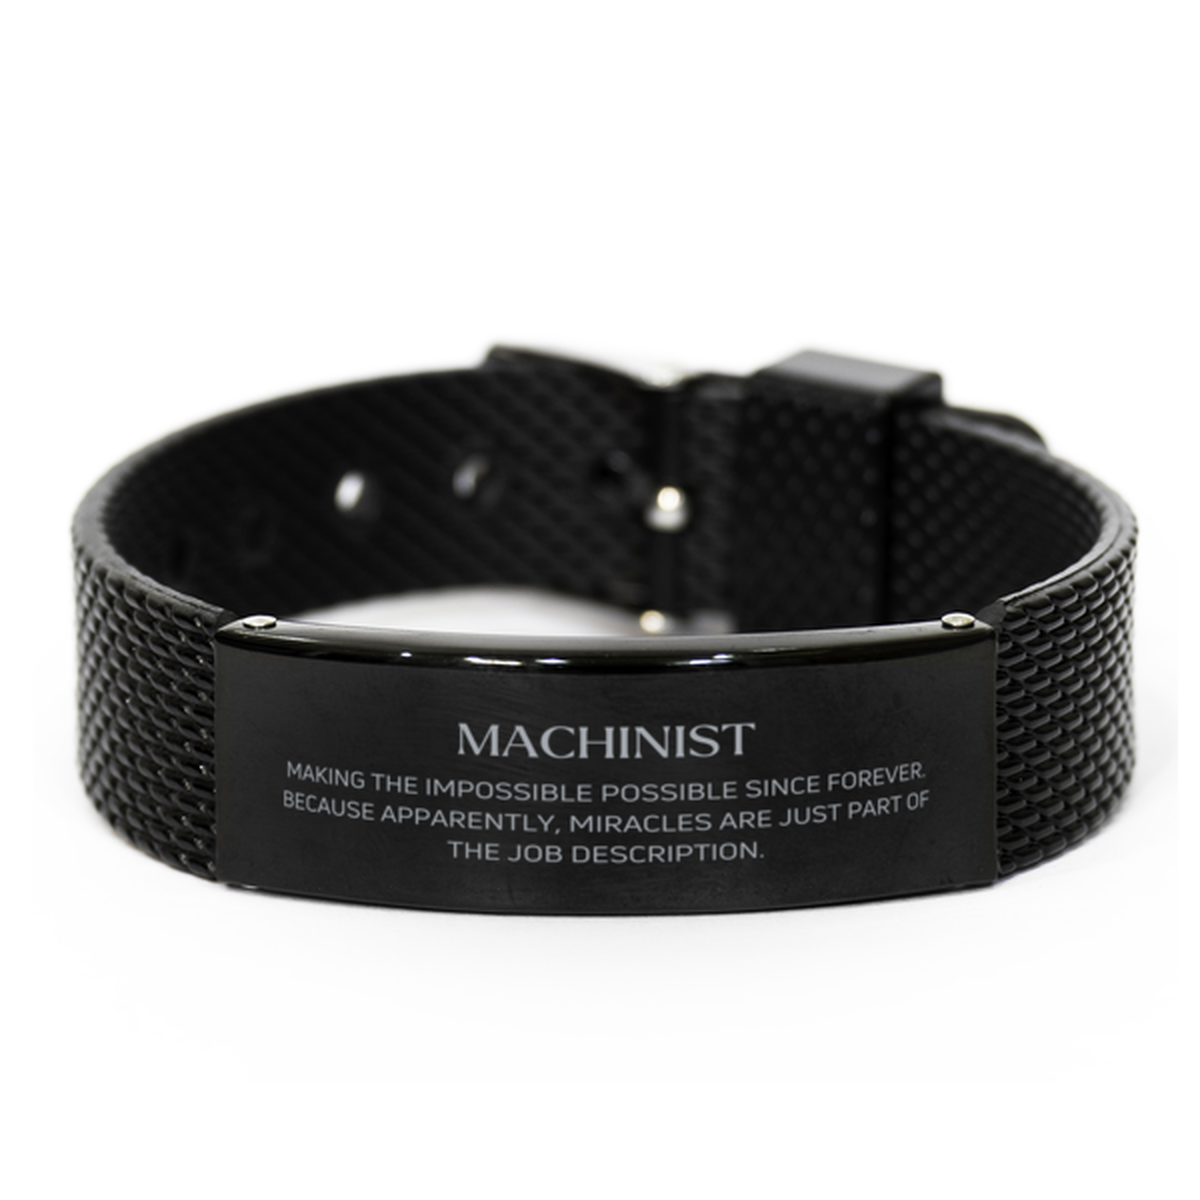 Funny Machinist Gifts, Miracles are just part of the job description, Inspirational Birthday Black Shark Mesh Bracelet For Machinist, Men, Women, Coworkers, Friends, Boss